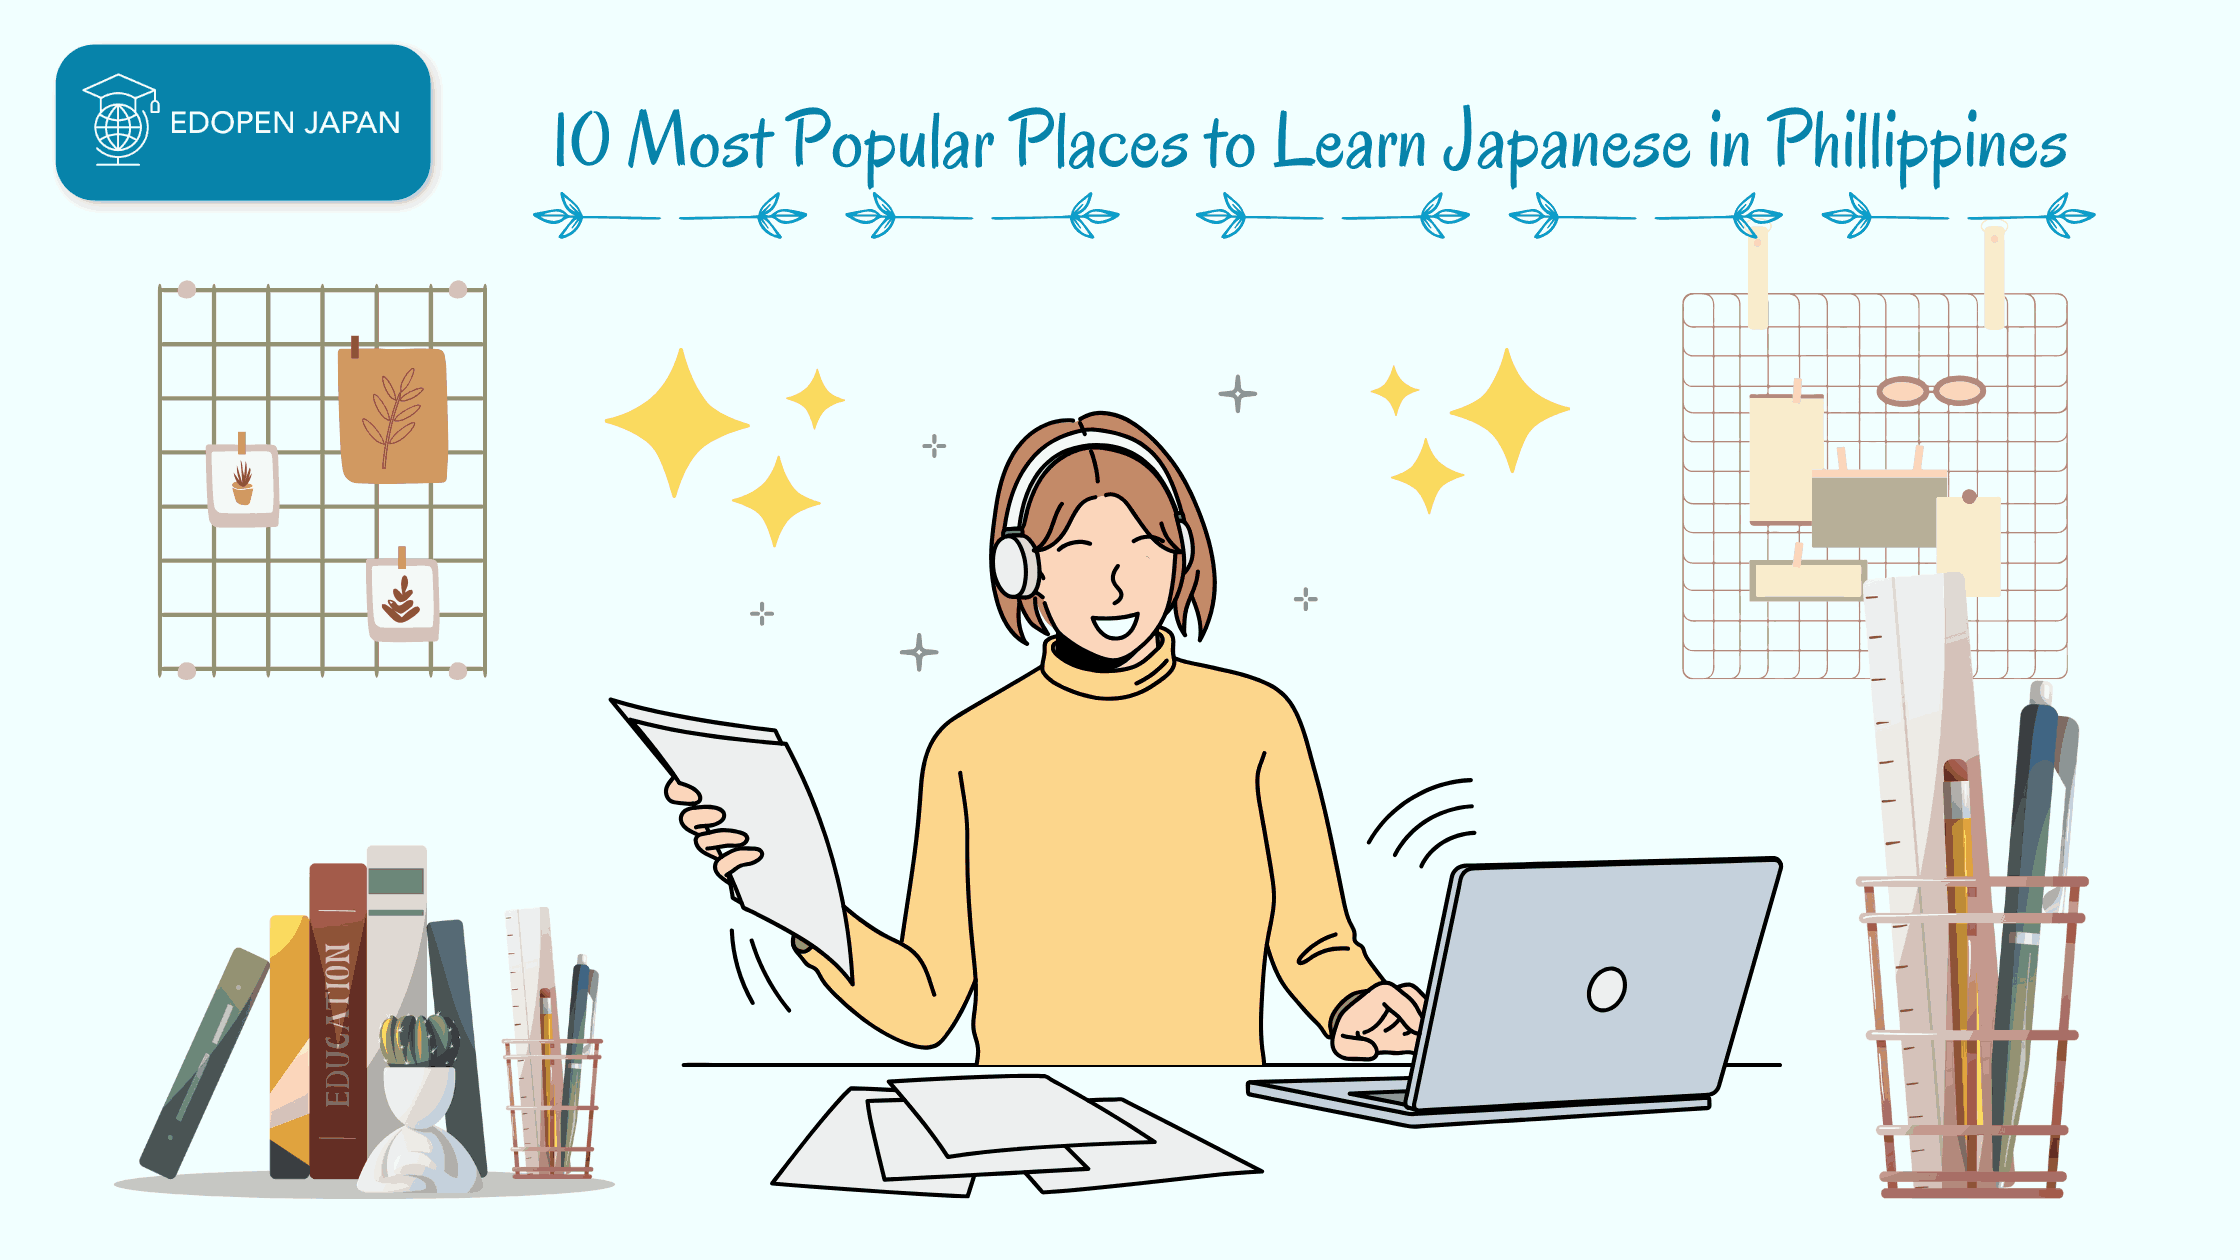 10 Most Popular Places to Learn Japanese in Philippines - EDOPEN Japan